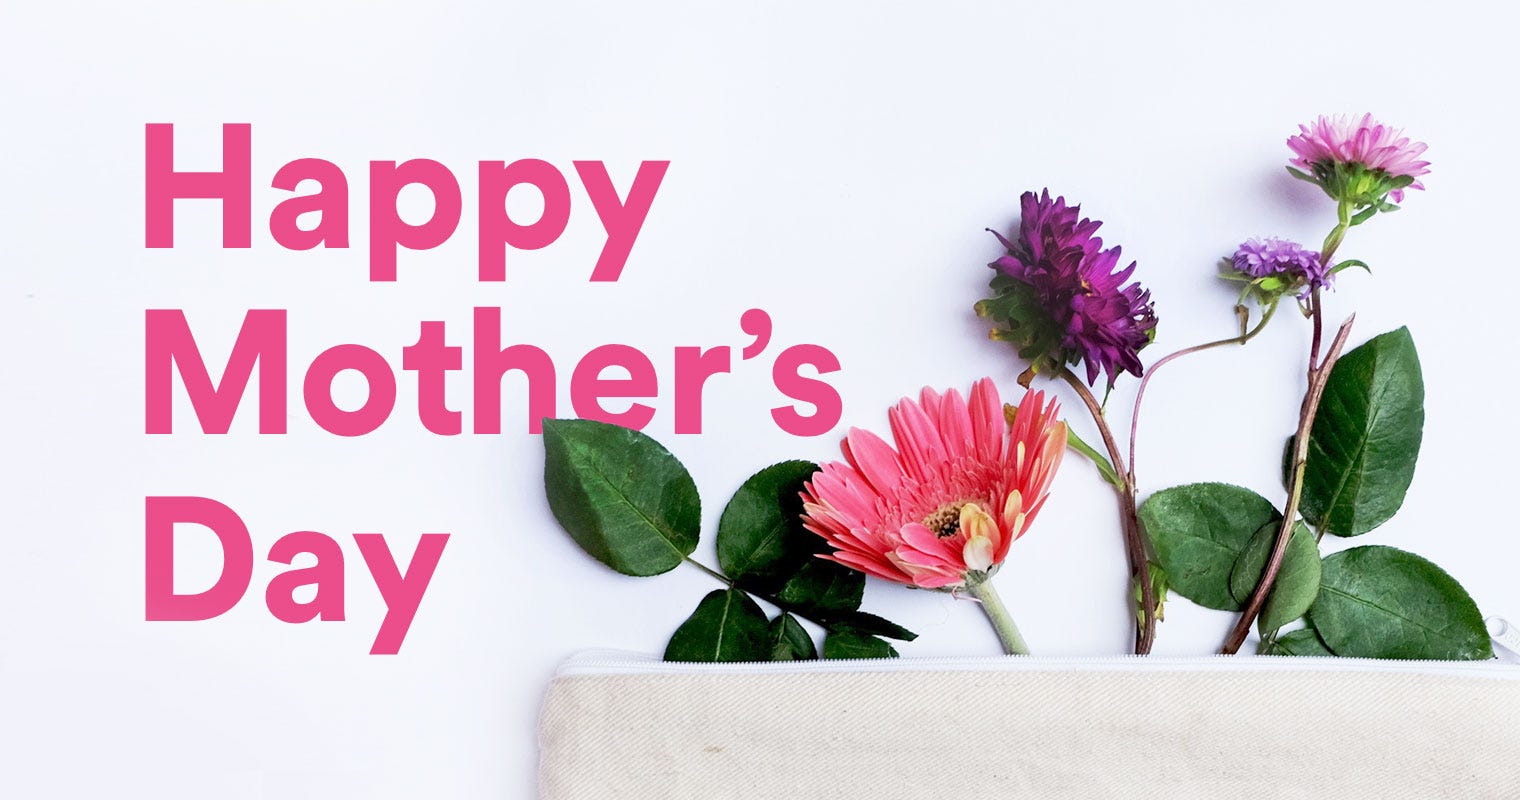 Happy Mother's Day - Messages to Moms 